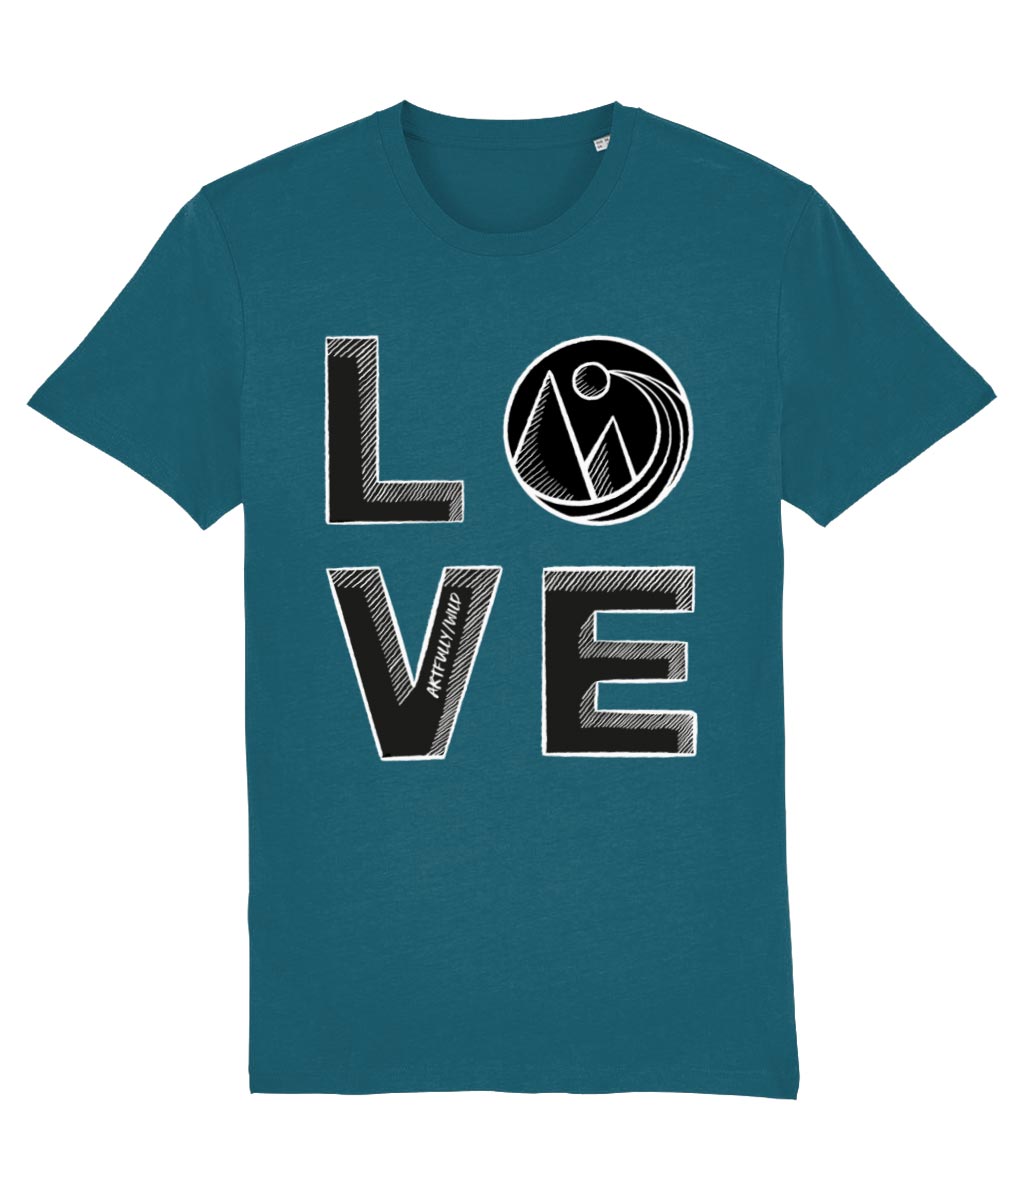 'LOVE' Print on Ocean Blue Organic T-Shirt. Unisex/Women/Men. Sustainable Clothing. Original Sketched Illustration by Artfully/Wild. Printed with water-based inks.